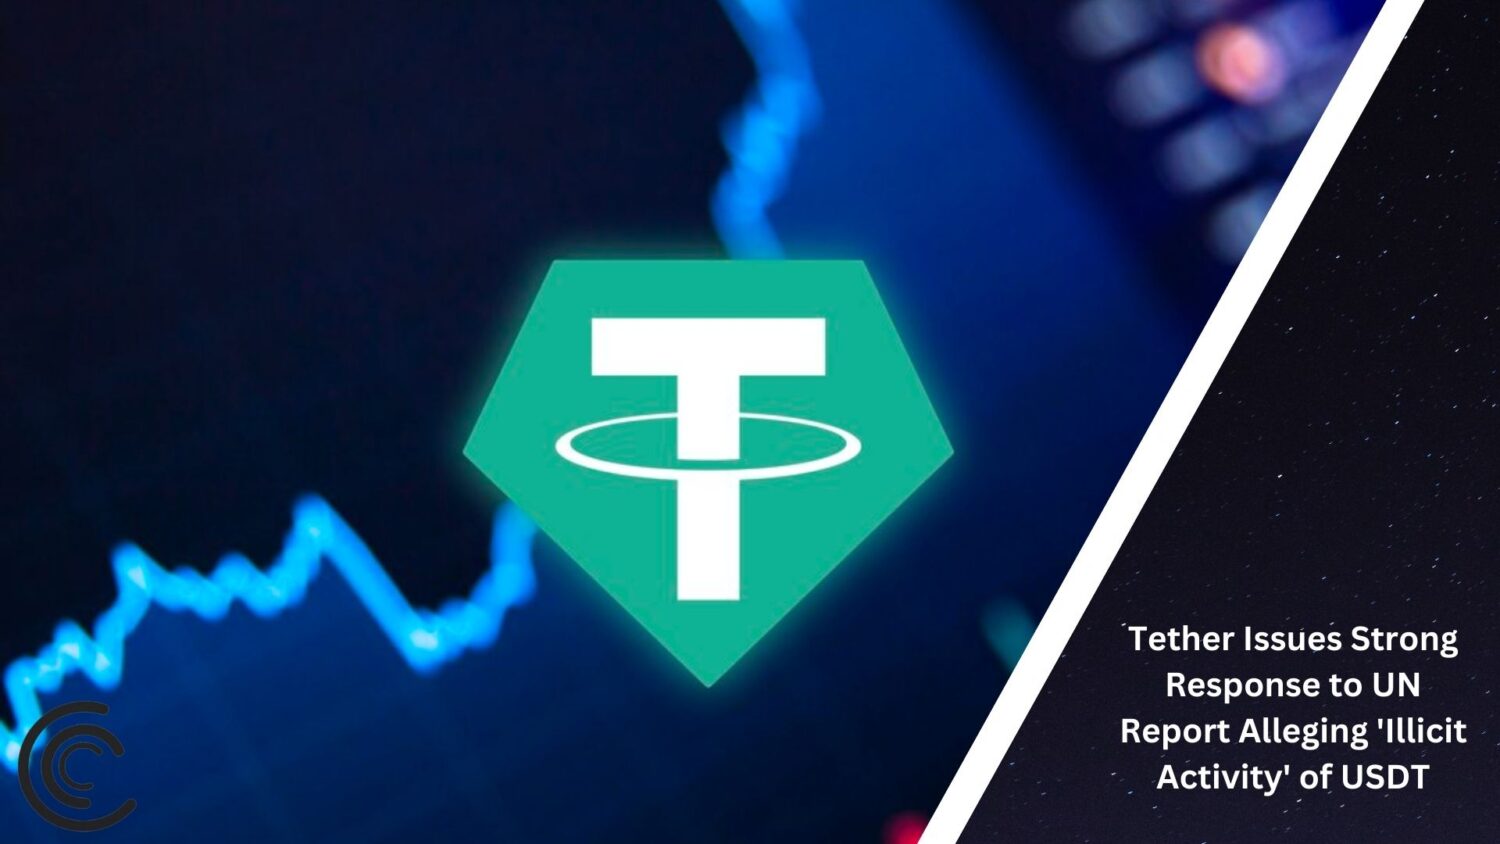 Tether Issues Strong Response To Un Report Alleging 'Illicit Activity' Of Usdt